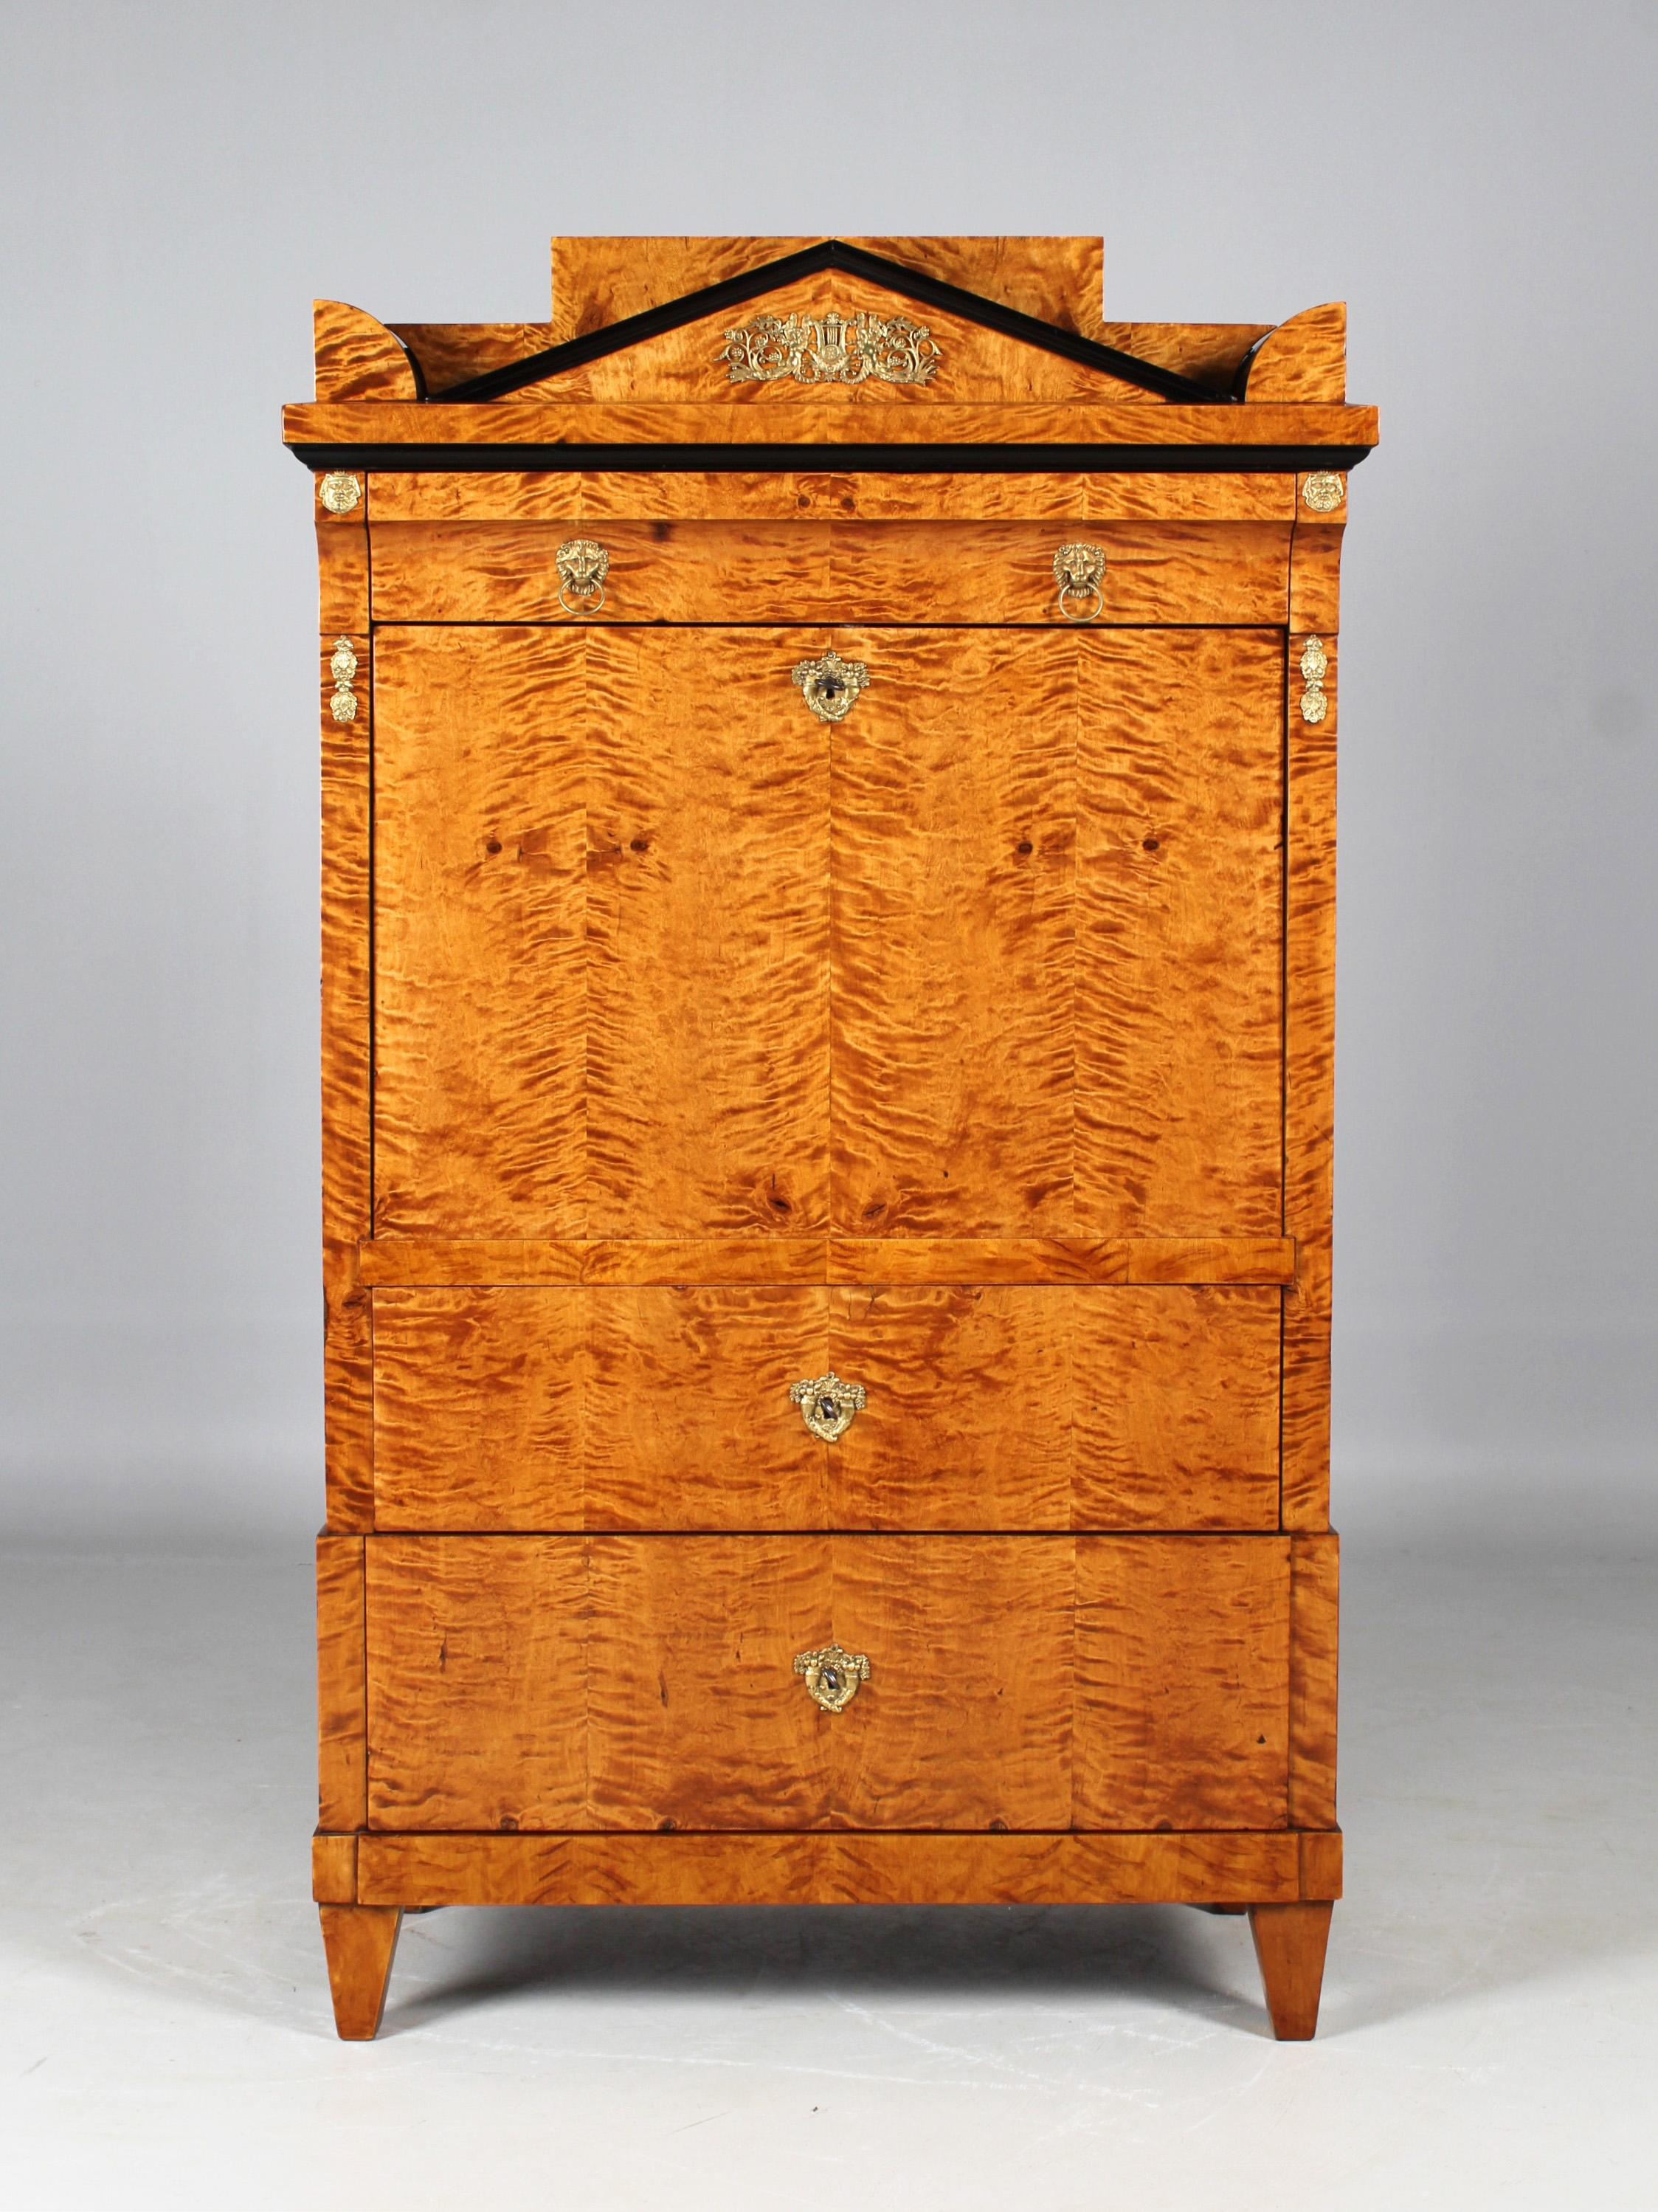 North Germany / Prussia
Birch
Biedermeier / Empire around 1815

Dimensions: H x W x D: 174 x 102 x 55 cm

Description:
Very exclusive secretary from the Prussian North German Biedermeier period around 1815.

Piece of furniture standing on